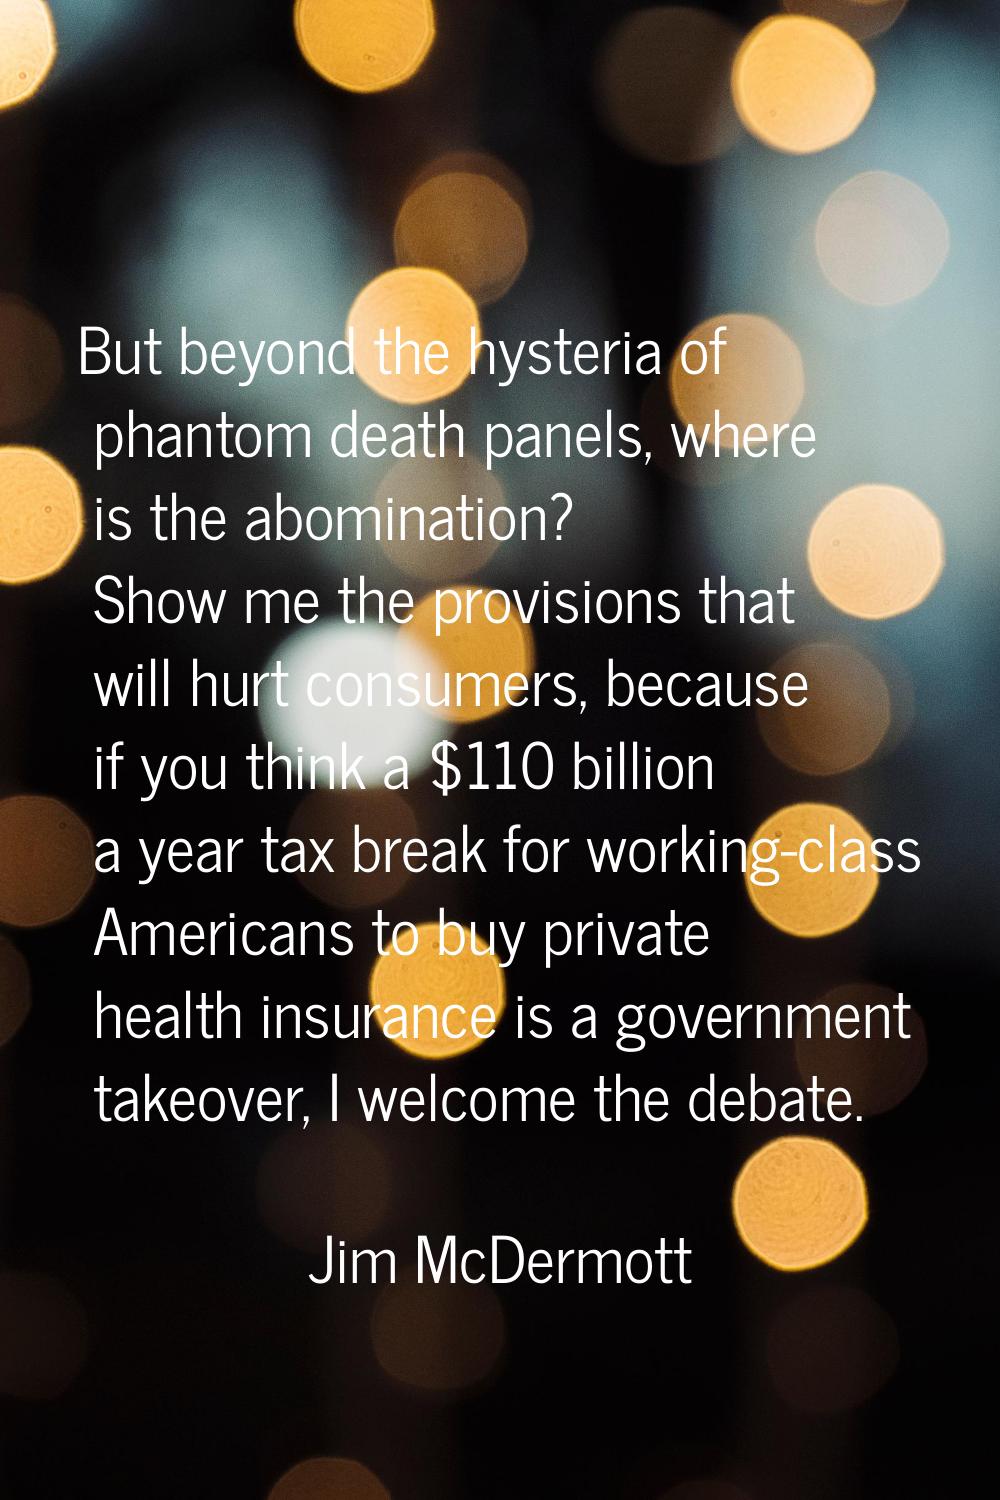 But beyond the hysteria of phantom death panels, where is the abomination? Show me the provisions t